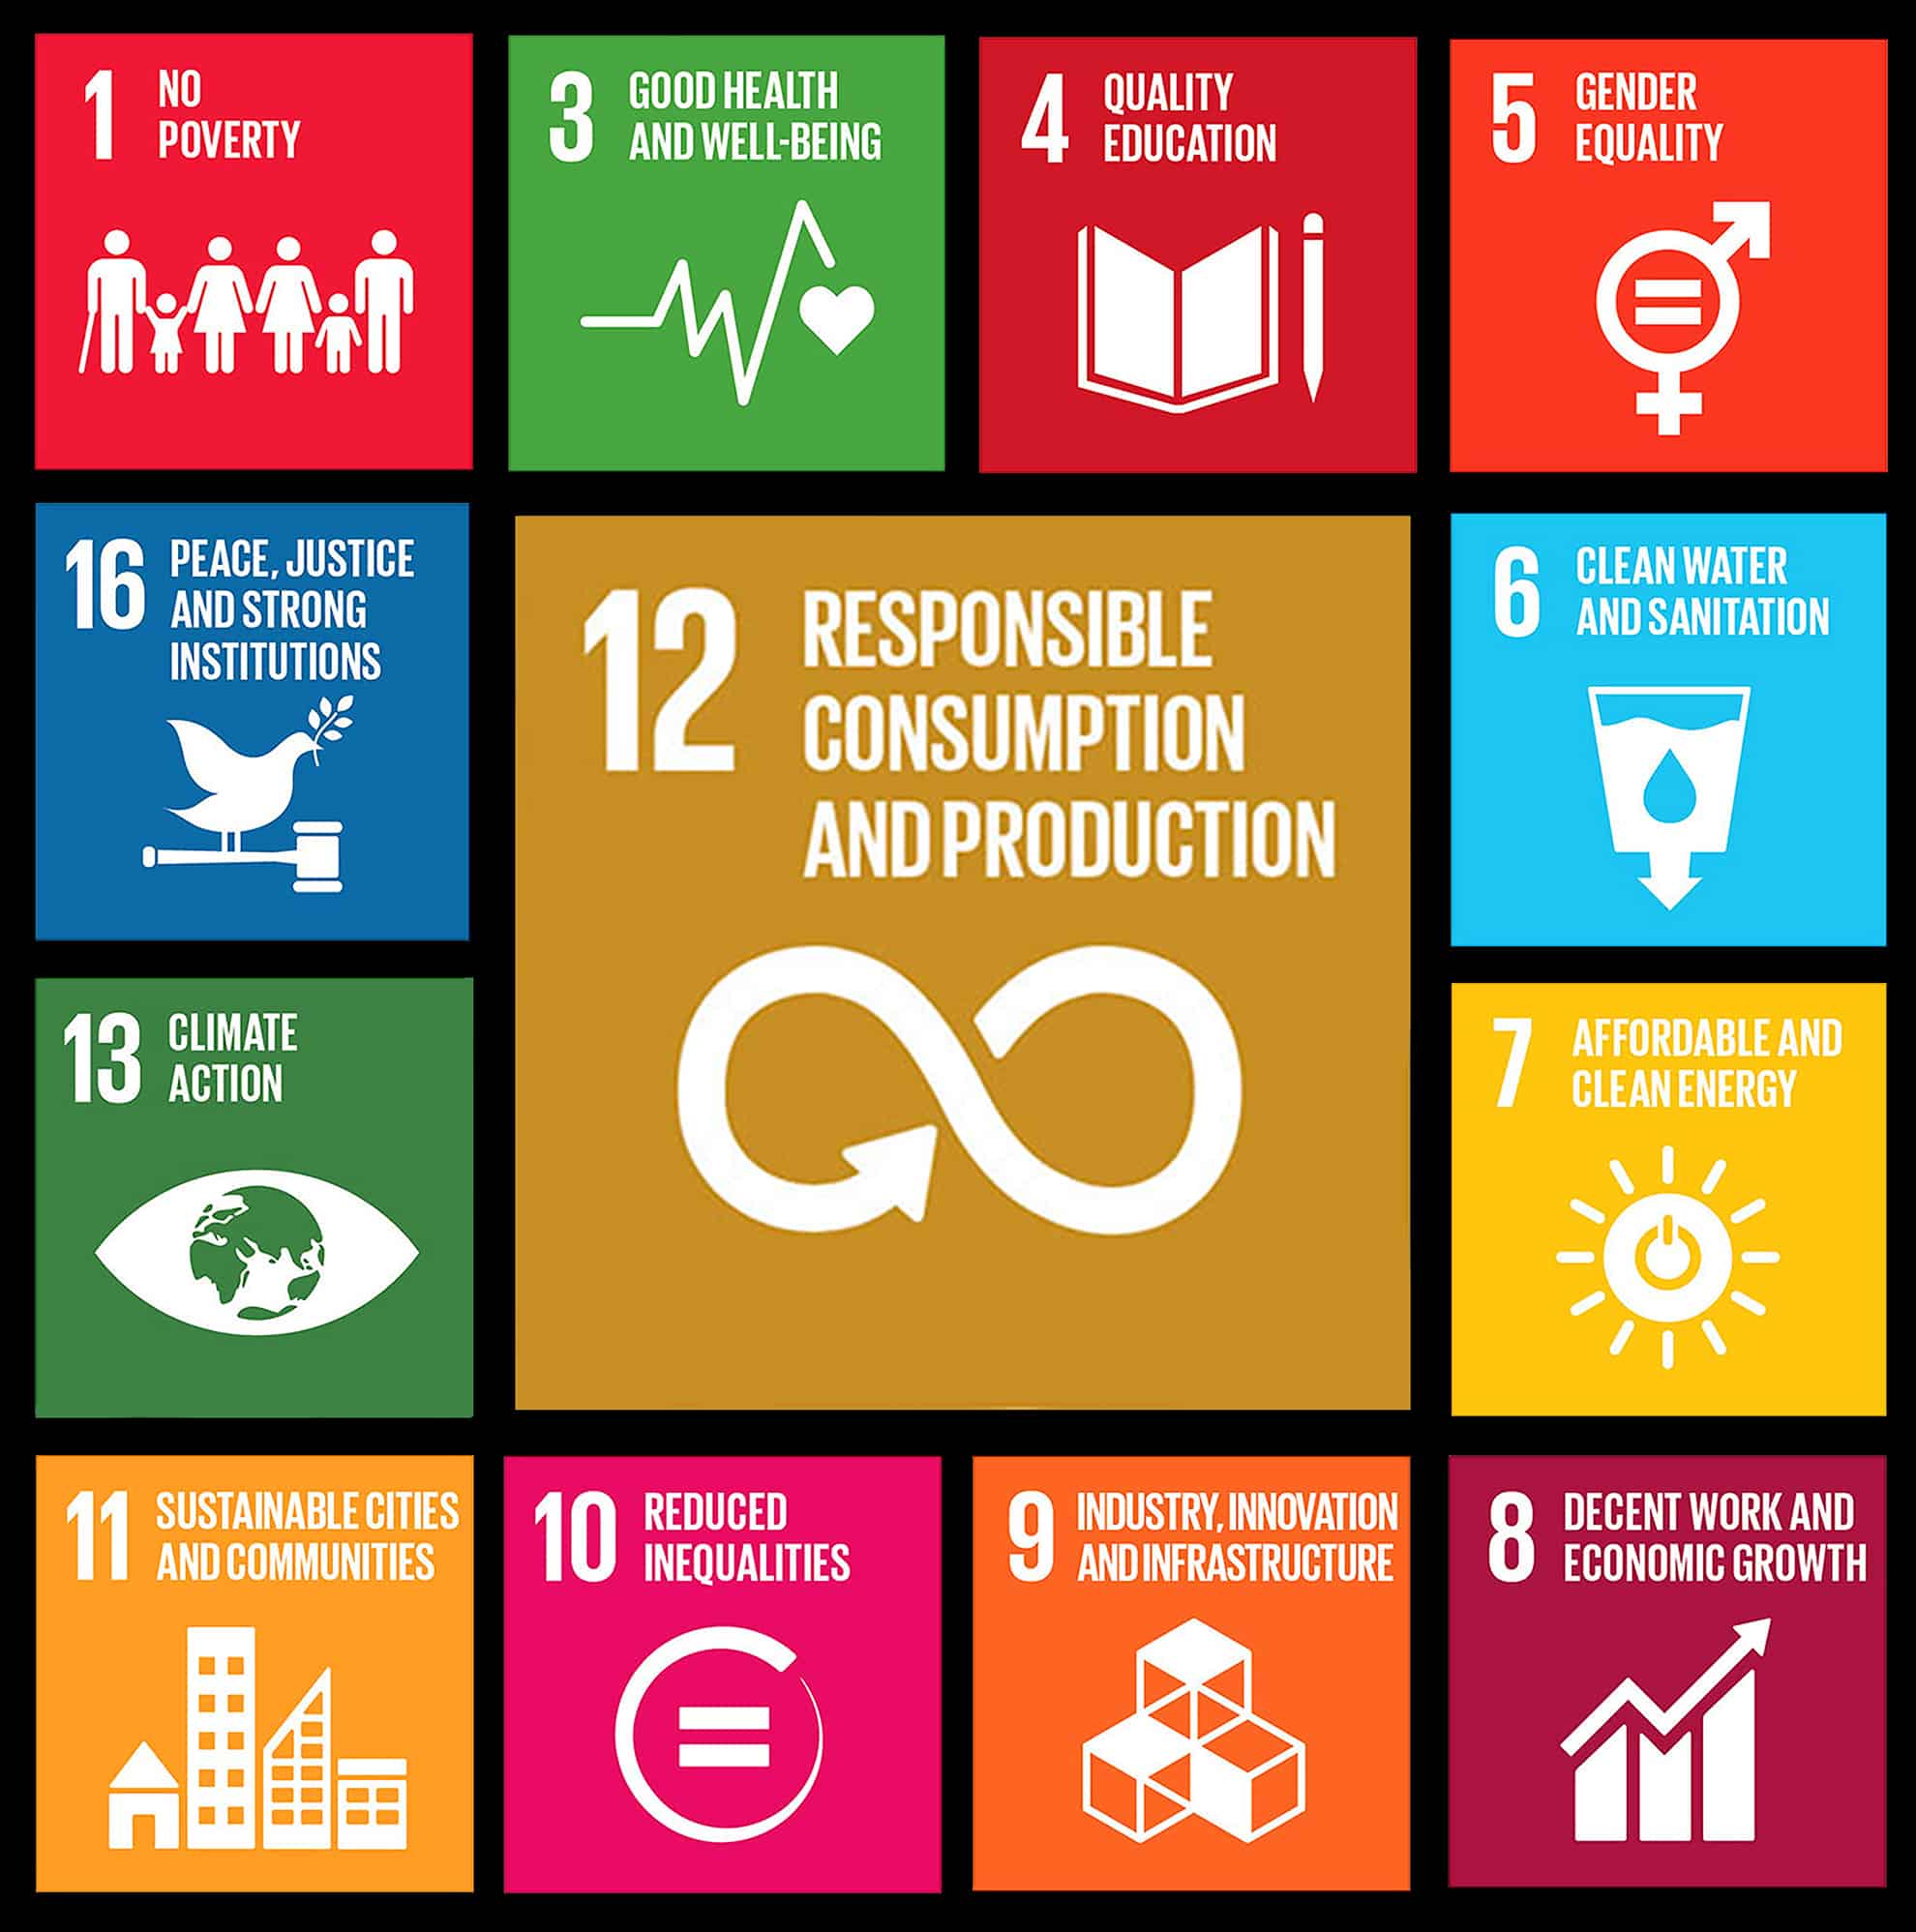 Sustainability, a key element of SDG #12, is integral to making progress in many other goals that affect all our lives.